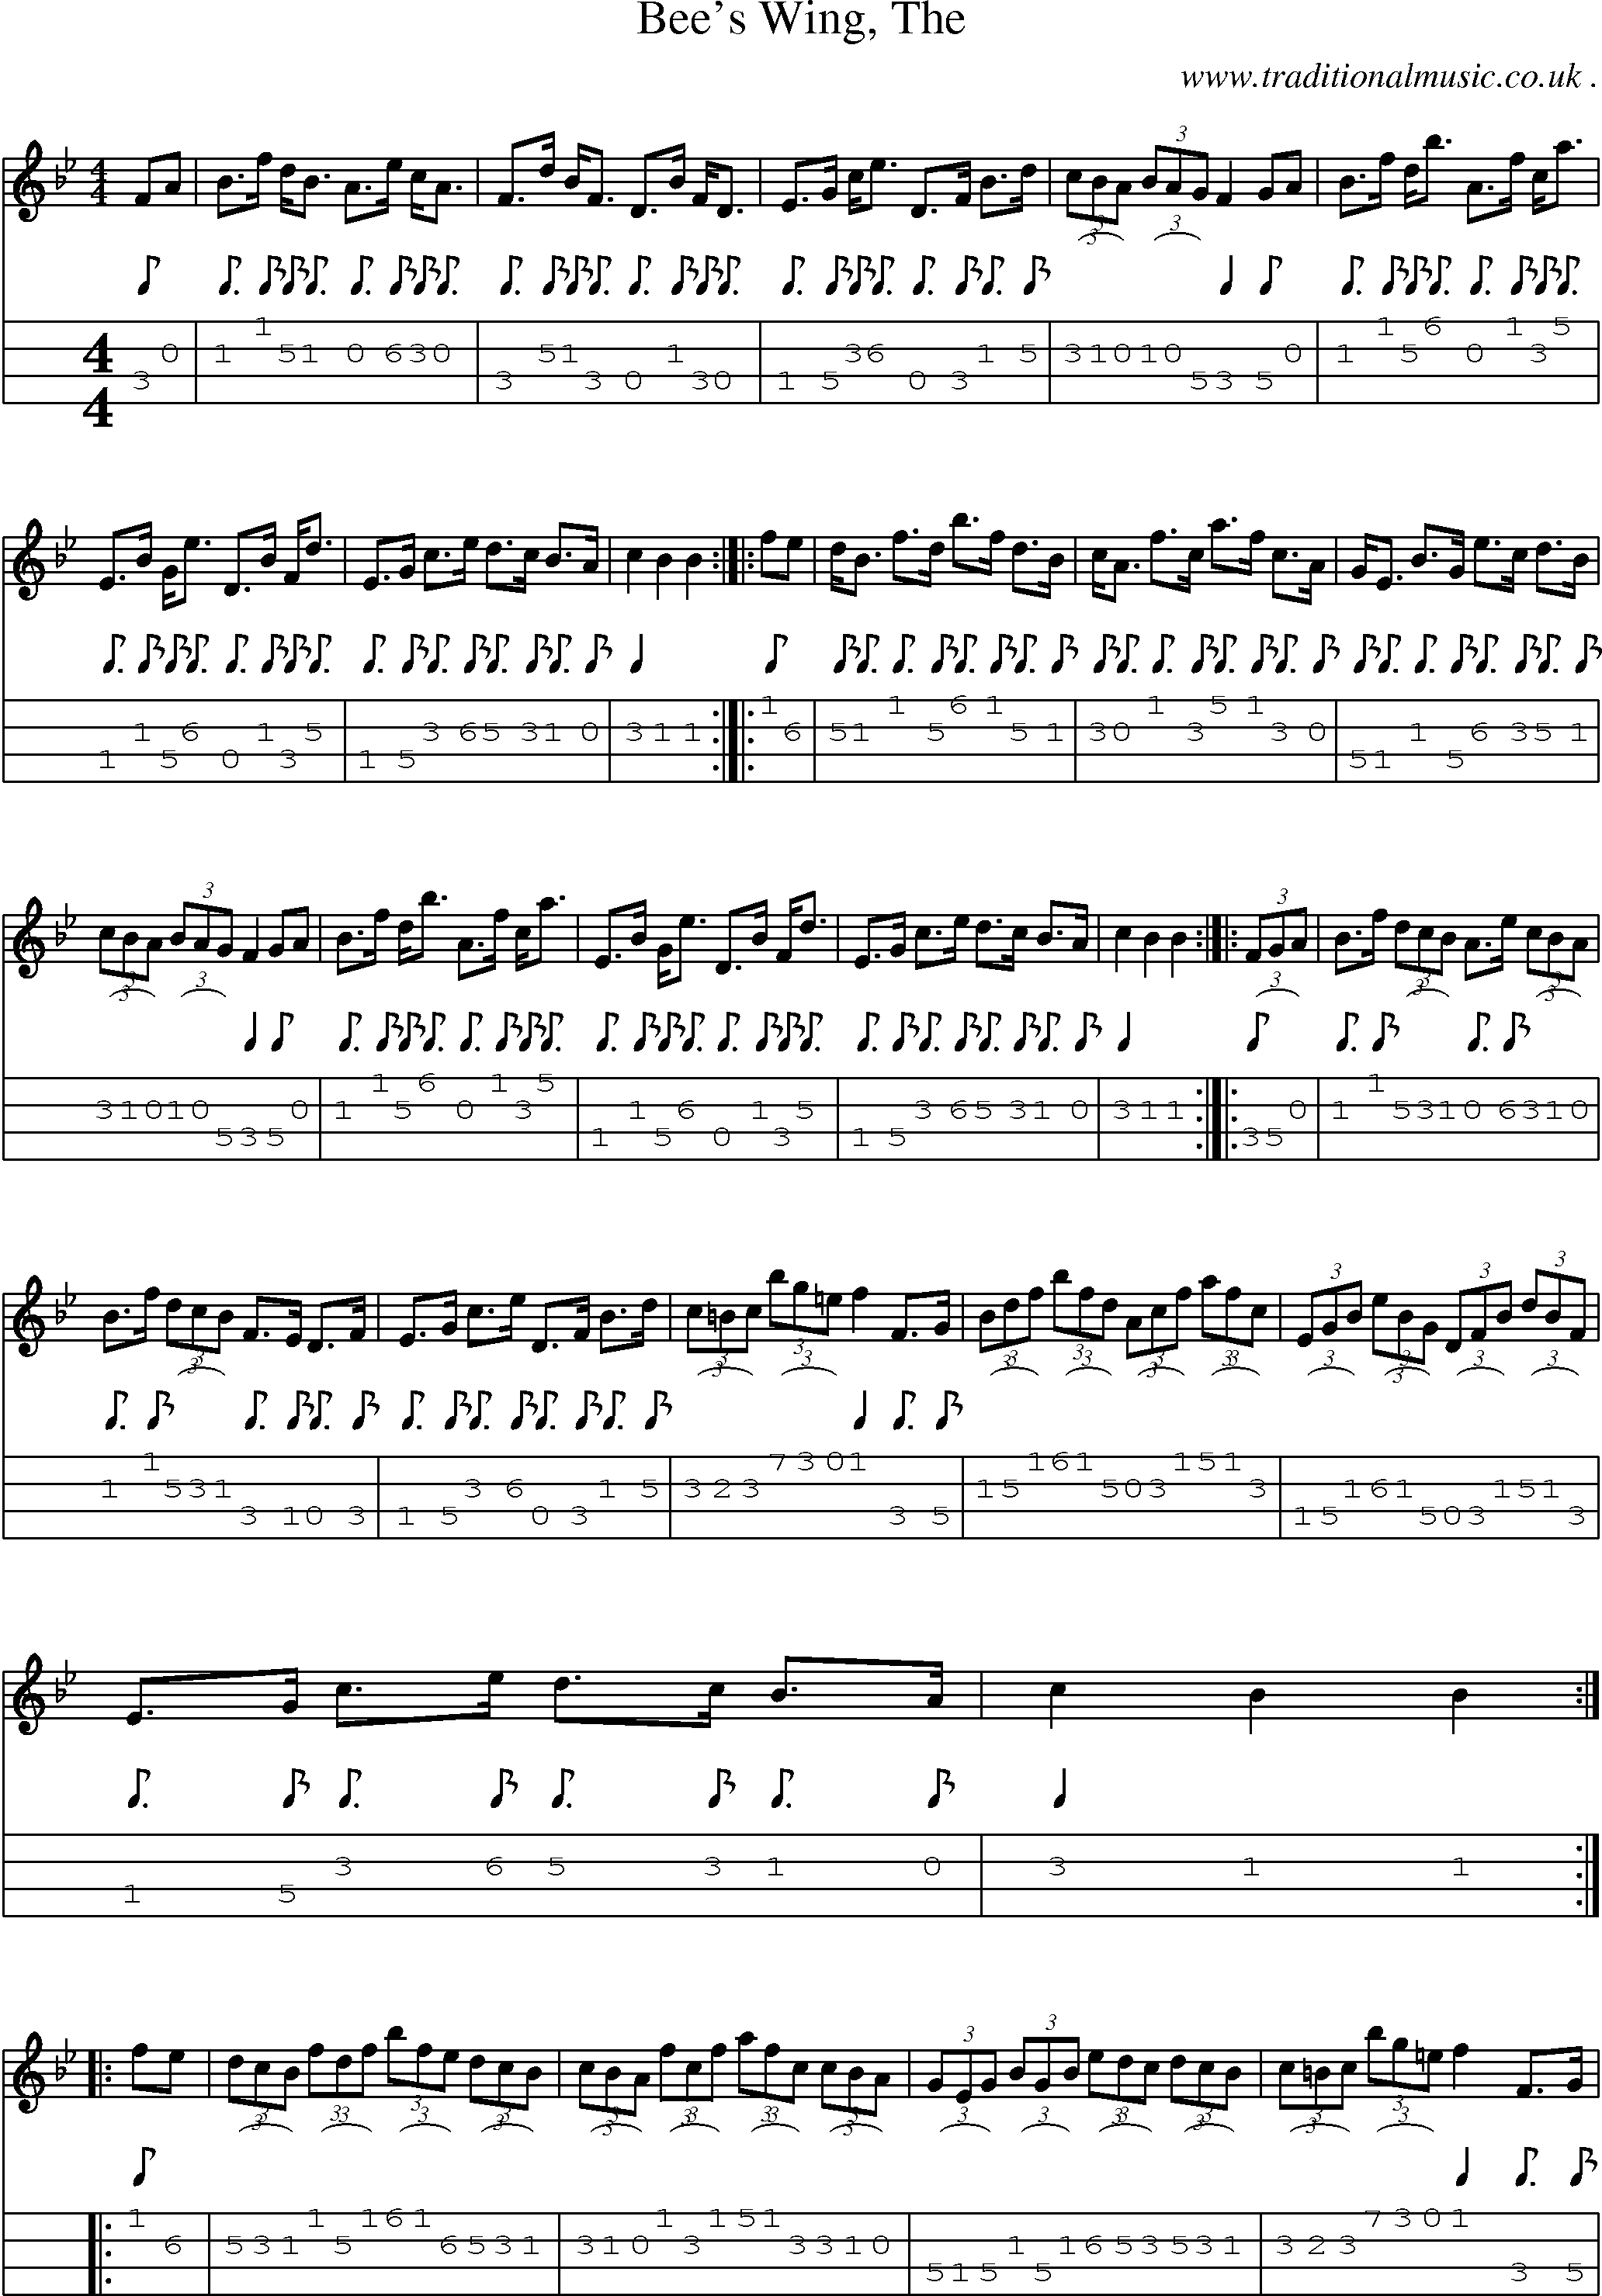 Sheet-music  score, Chords and Mandolin Tabs for Bees Wing The